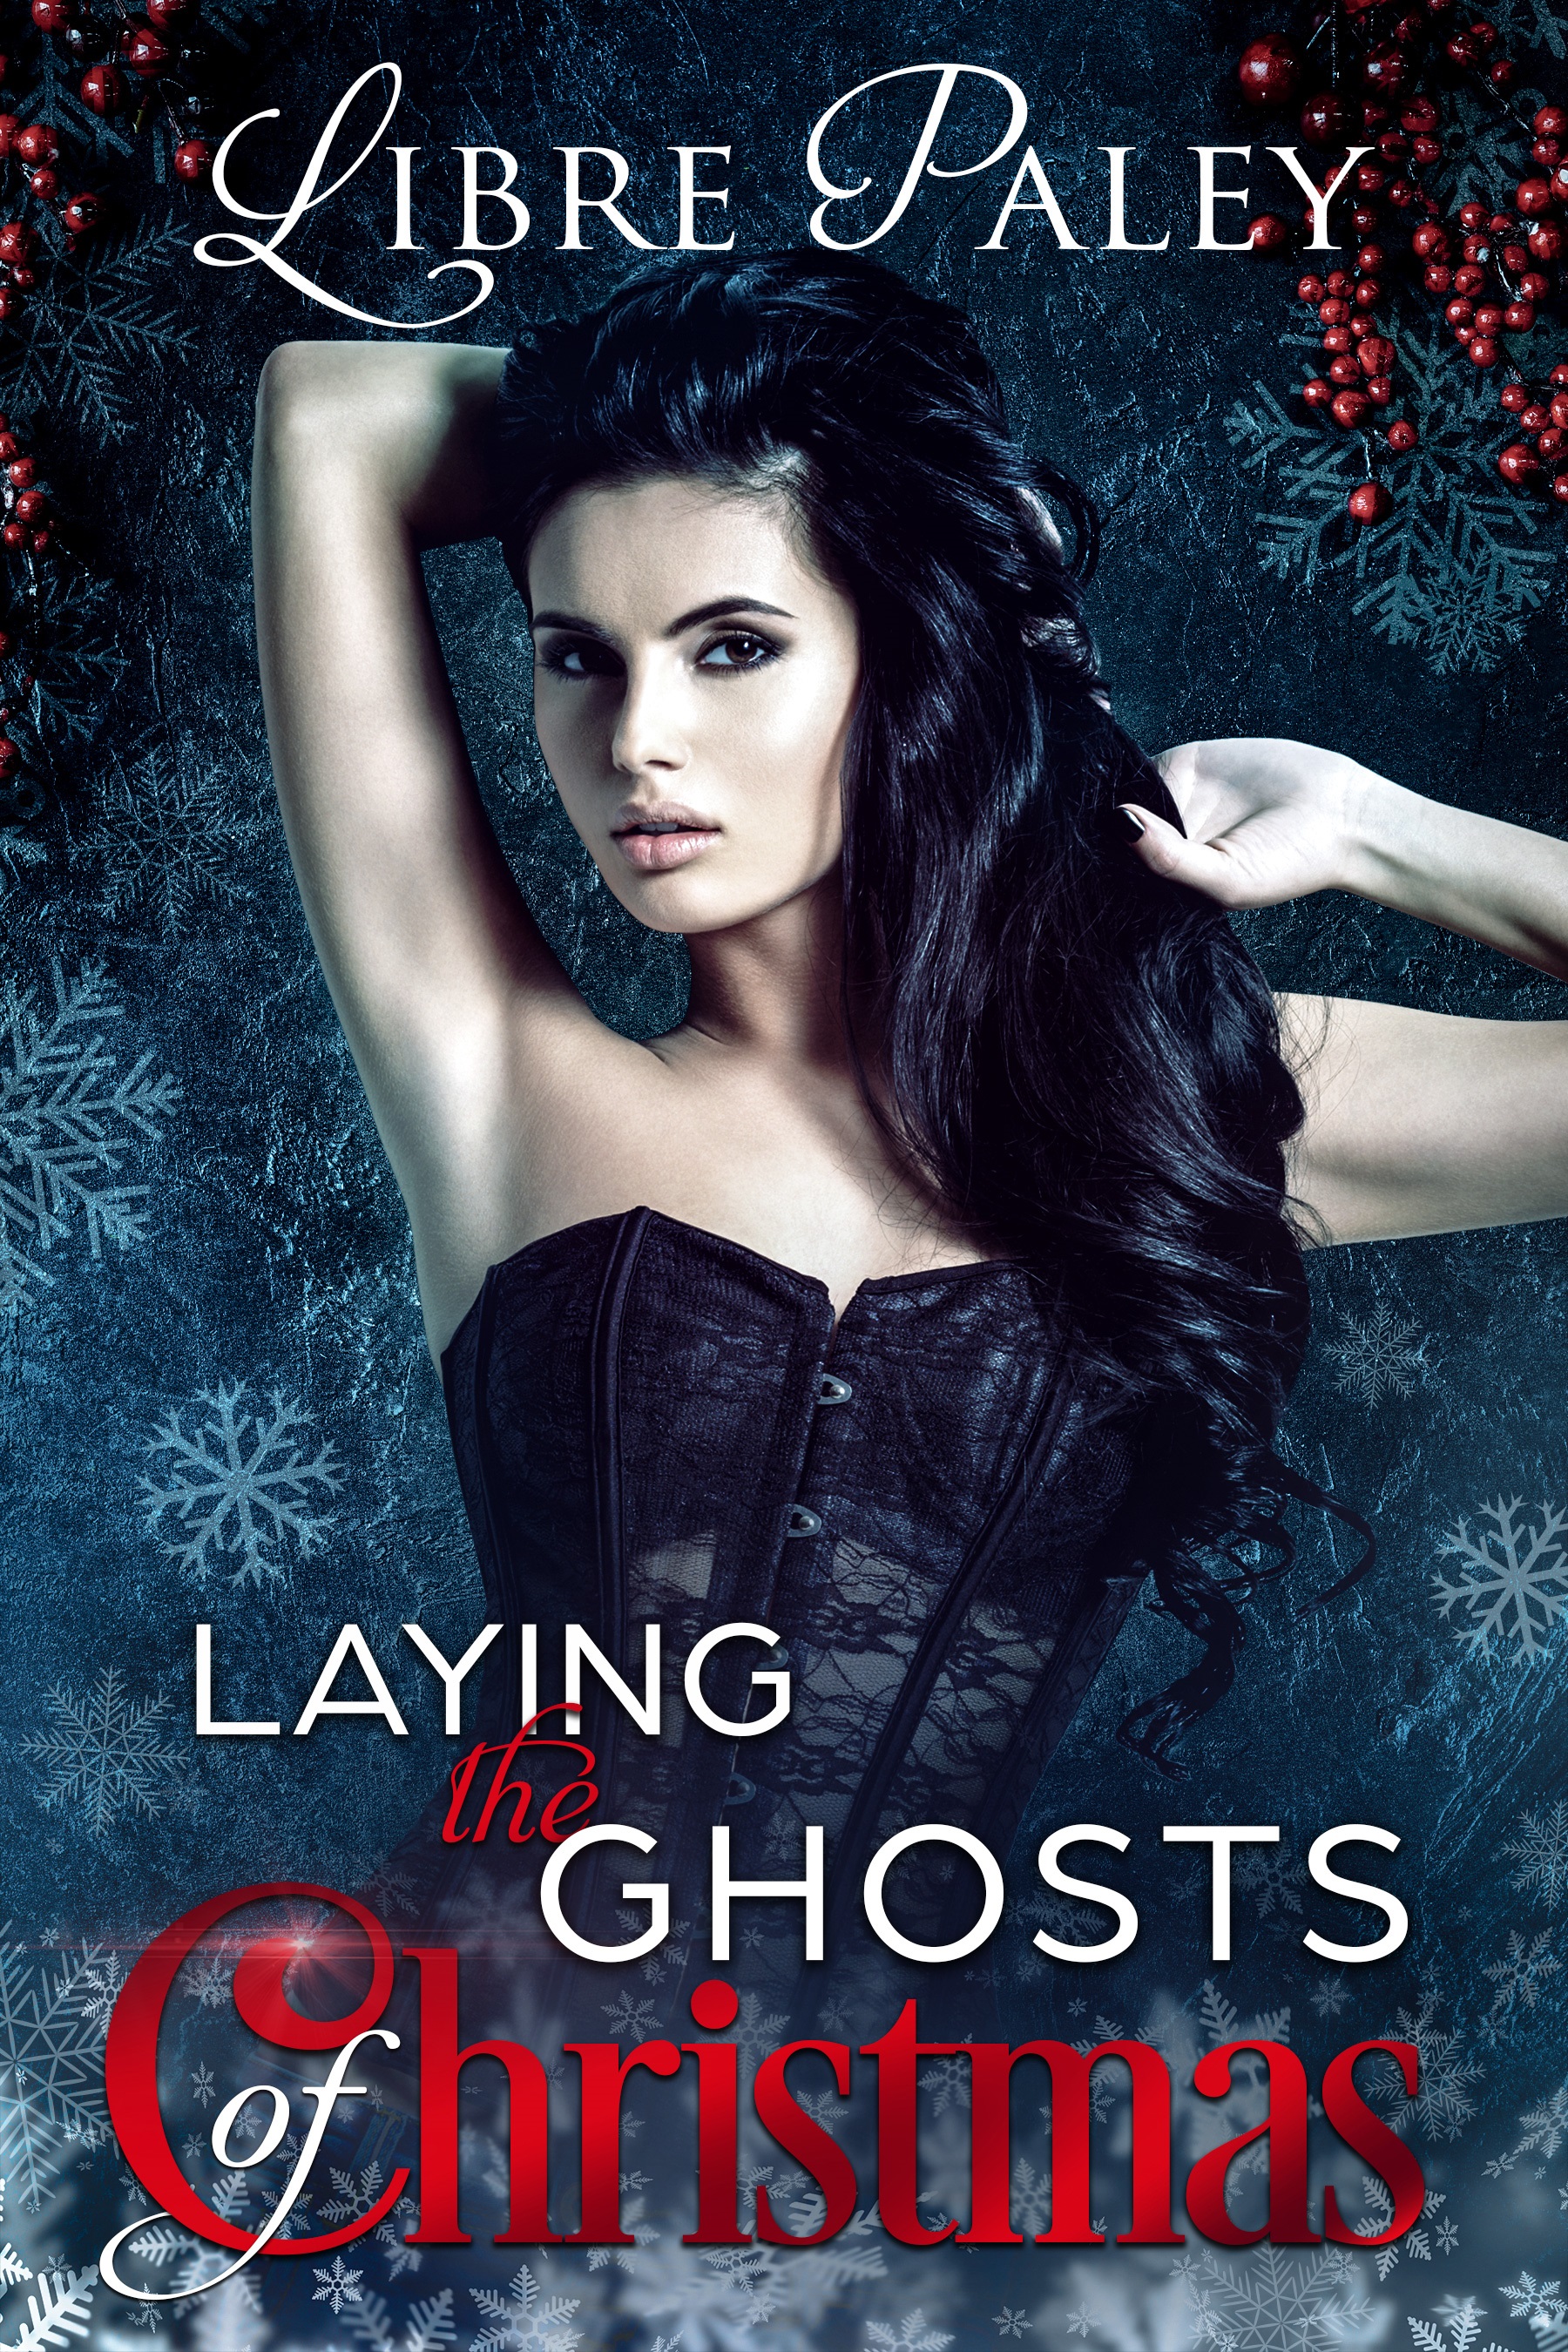 FREE: Laying the Ghosts of Christmas by Libre Paley